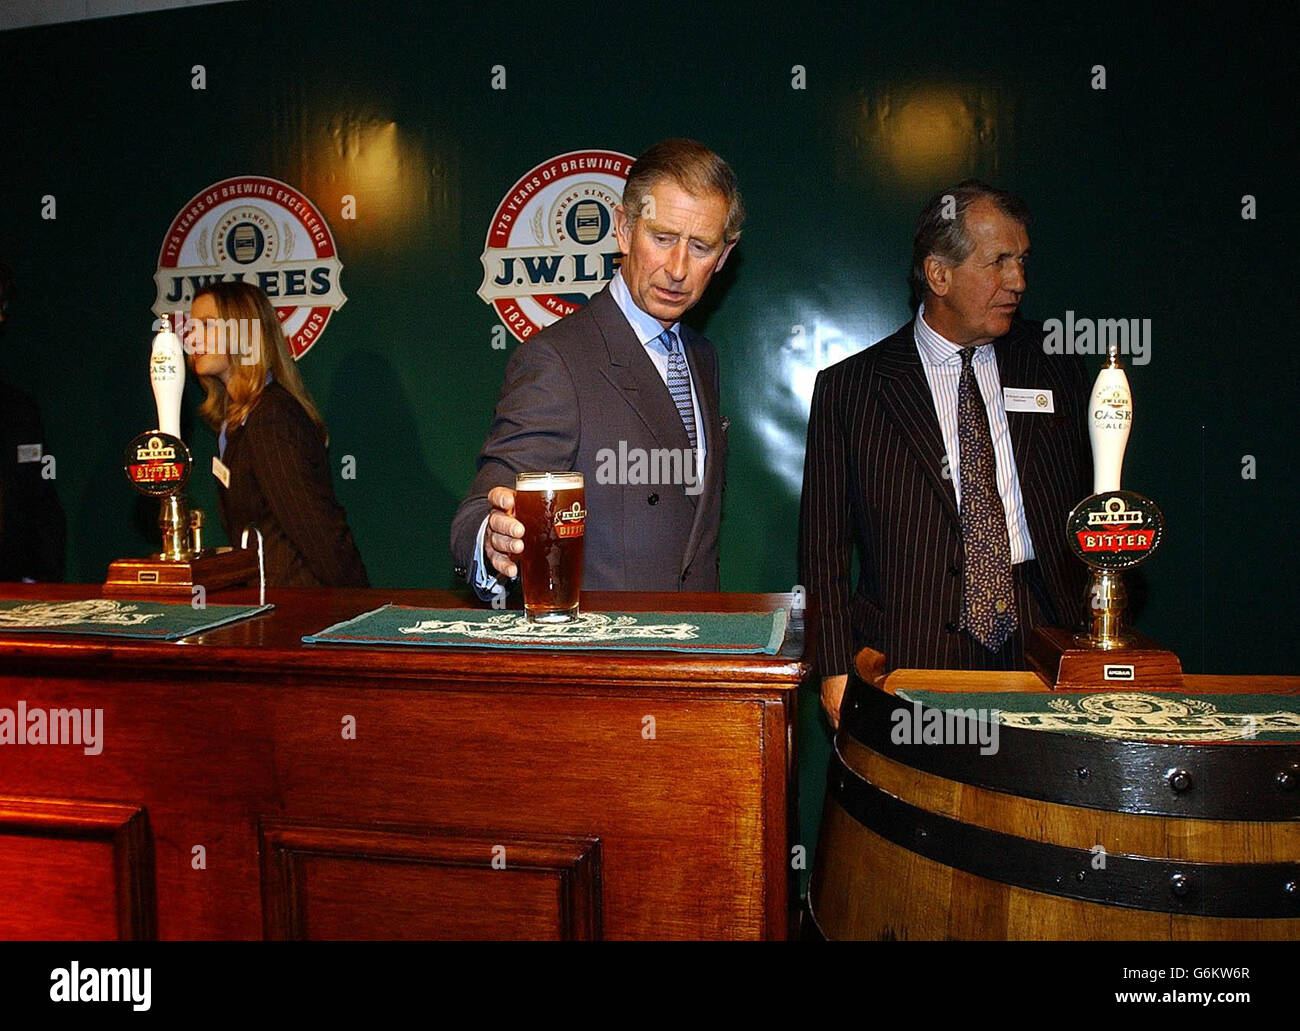 The Prince of Wales picks up a pint of beer from behind the bar during a visit to the JW Lees Brewery at Middleton near Manchester. Members of the Lees-Jones family, who still run the brewery, met the Prince at the entrance before taking him on a tour to celebrate its 175th anniversary. Stock Photo